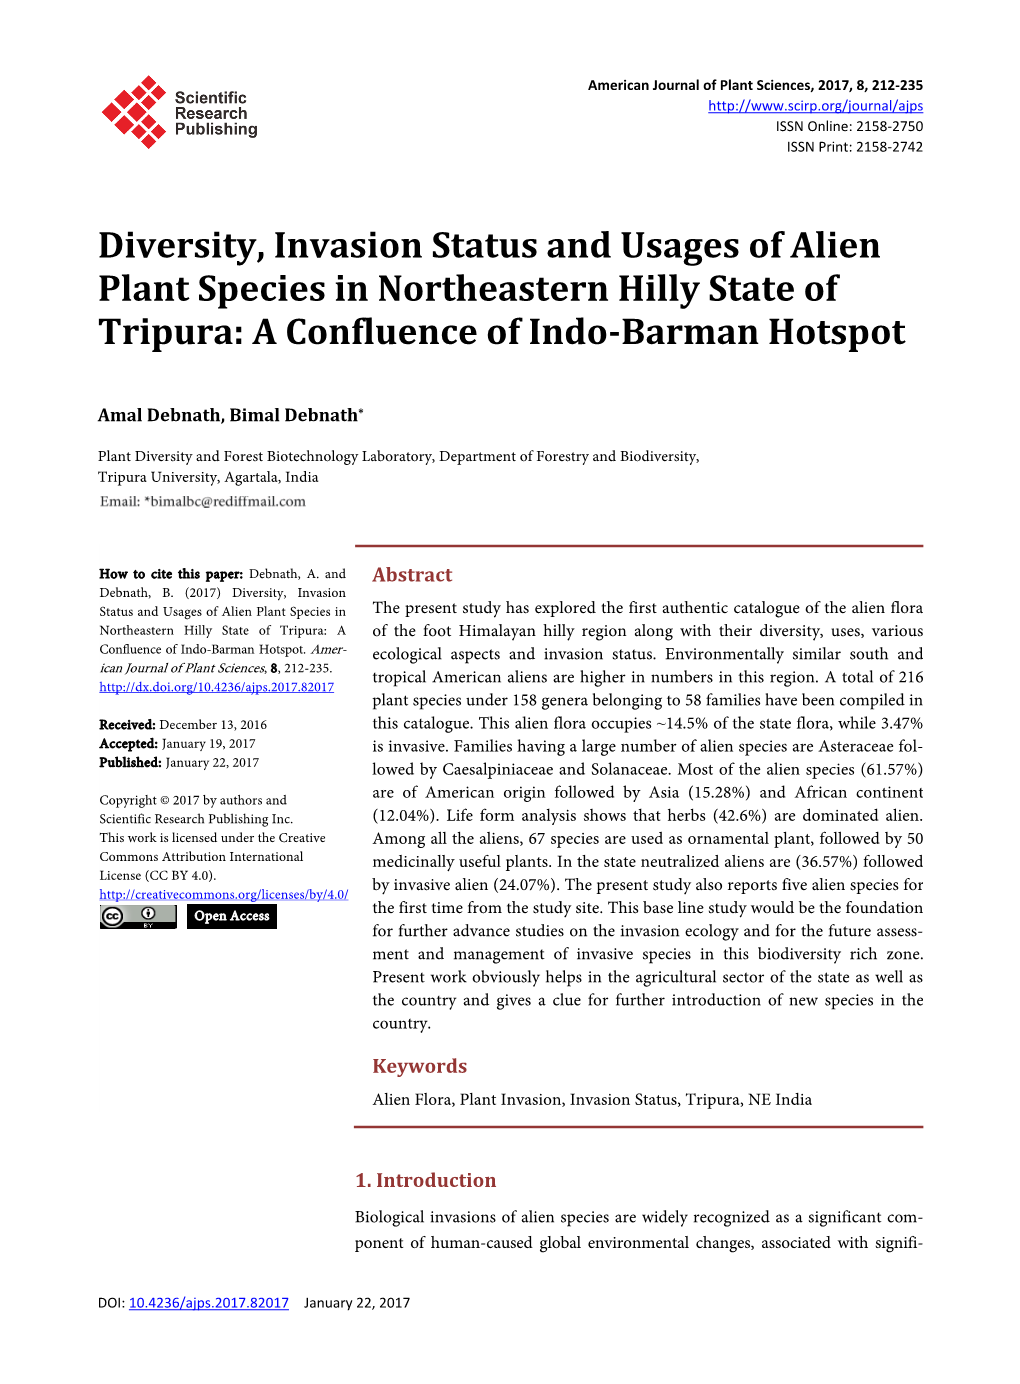 Diversity, Invasion Status and Usages of Alien Plant Species in Northeastern Hilly State of Tripura: a Confluence of Indo-Barman Hotspot